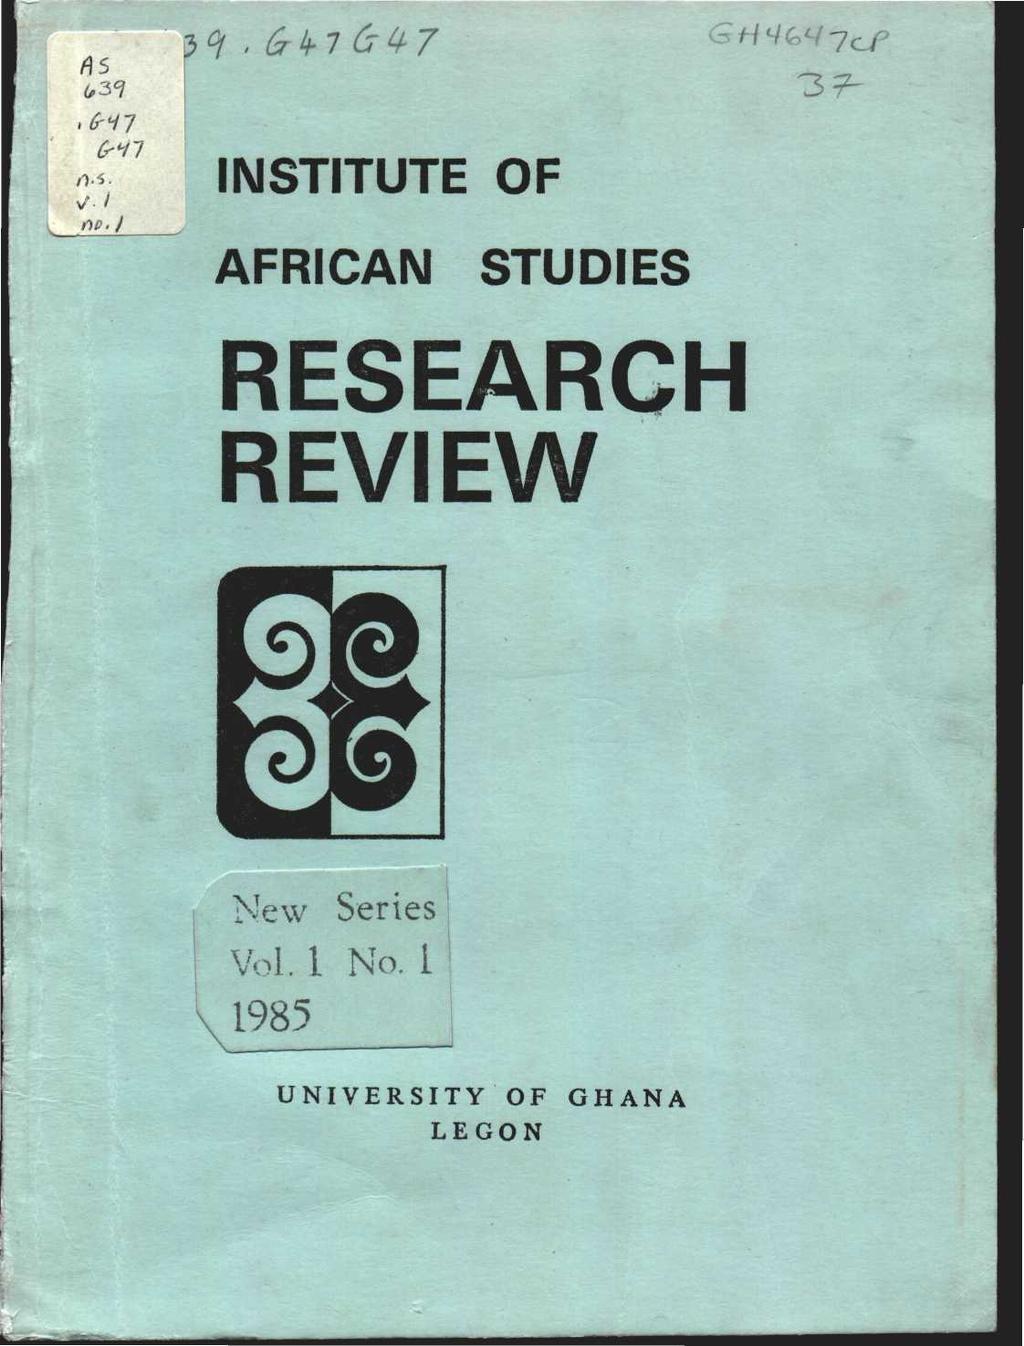 AS v / CrHl INSTITUTE OF AFRICAN STUDIES RESEARCH REVIEW